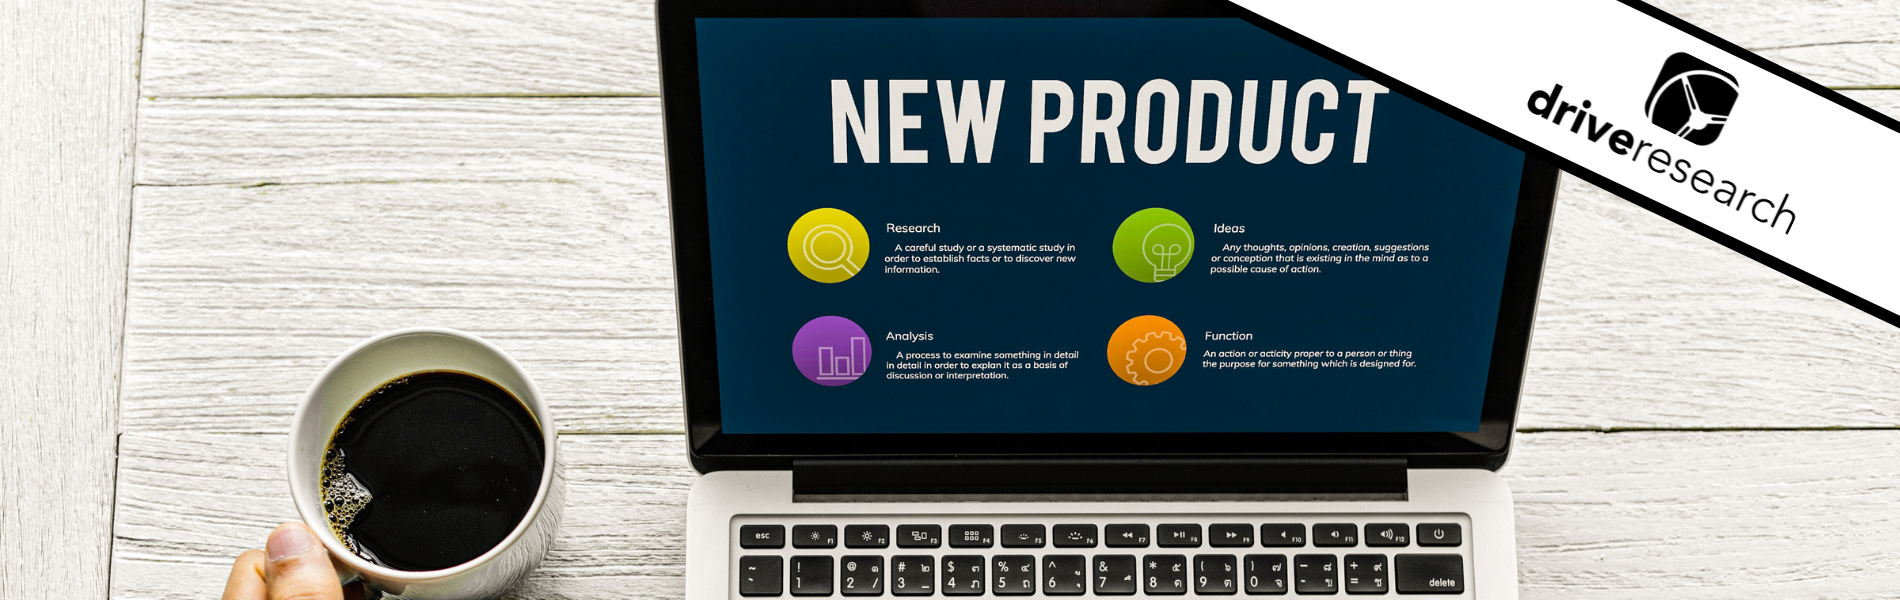 lap top that says "new product" next to a cup of coffee - drive research blog